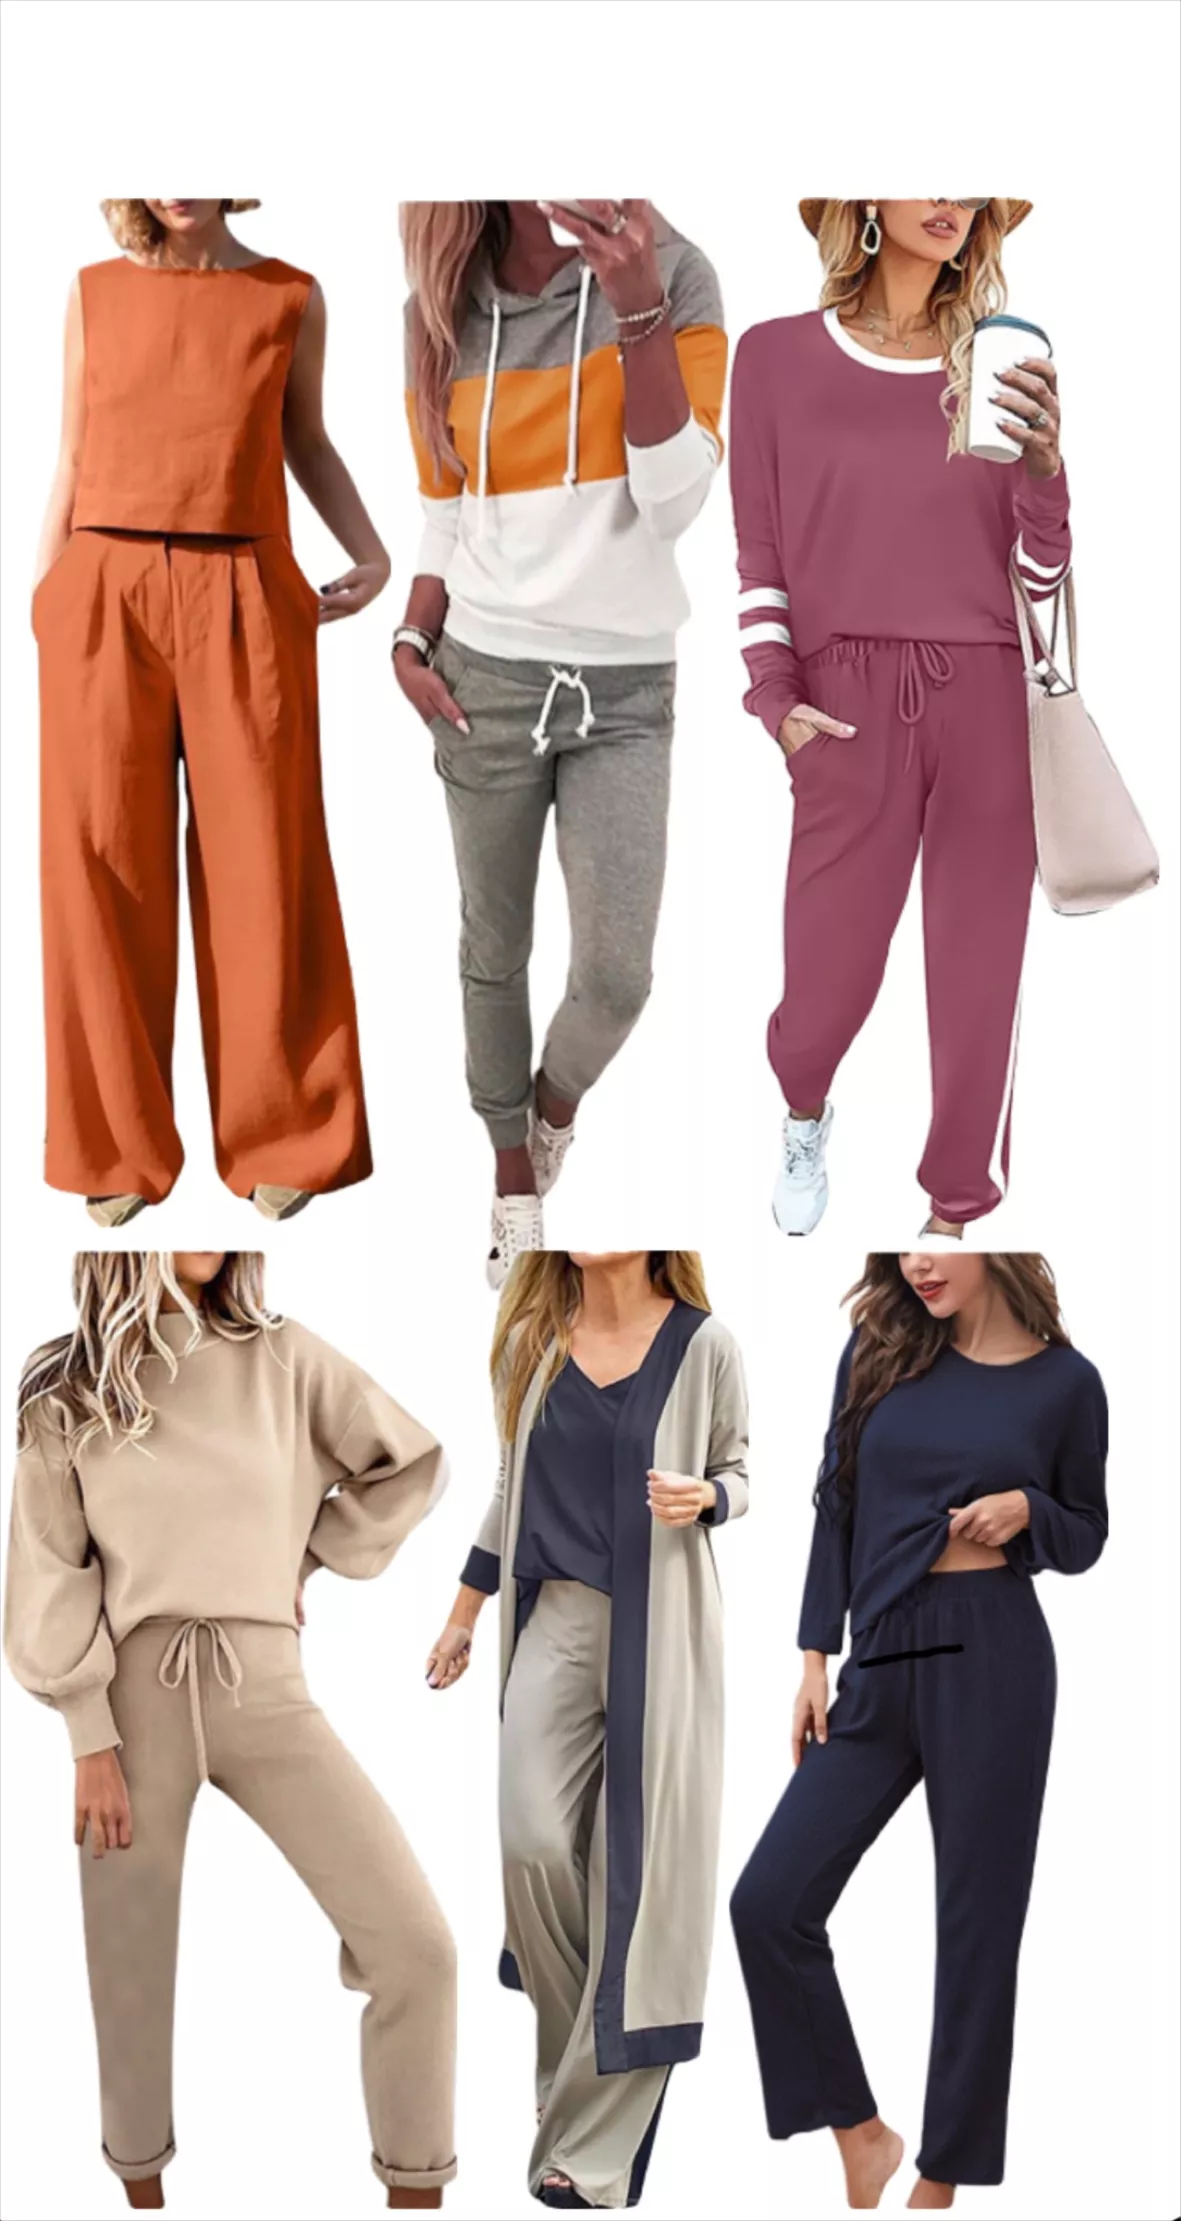 Fall Clearance Sale! RQYYD Women Hoodies Tracksuit Long Sleeve Sweatshirts  Jogger Pants Sweatpants Jogging Suits 2 Piece Outfits Casual Hooded Lounge